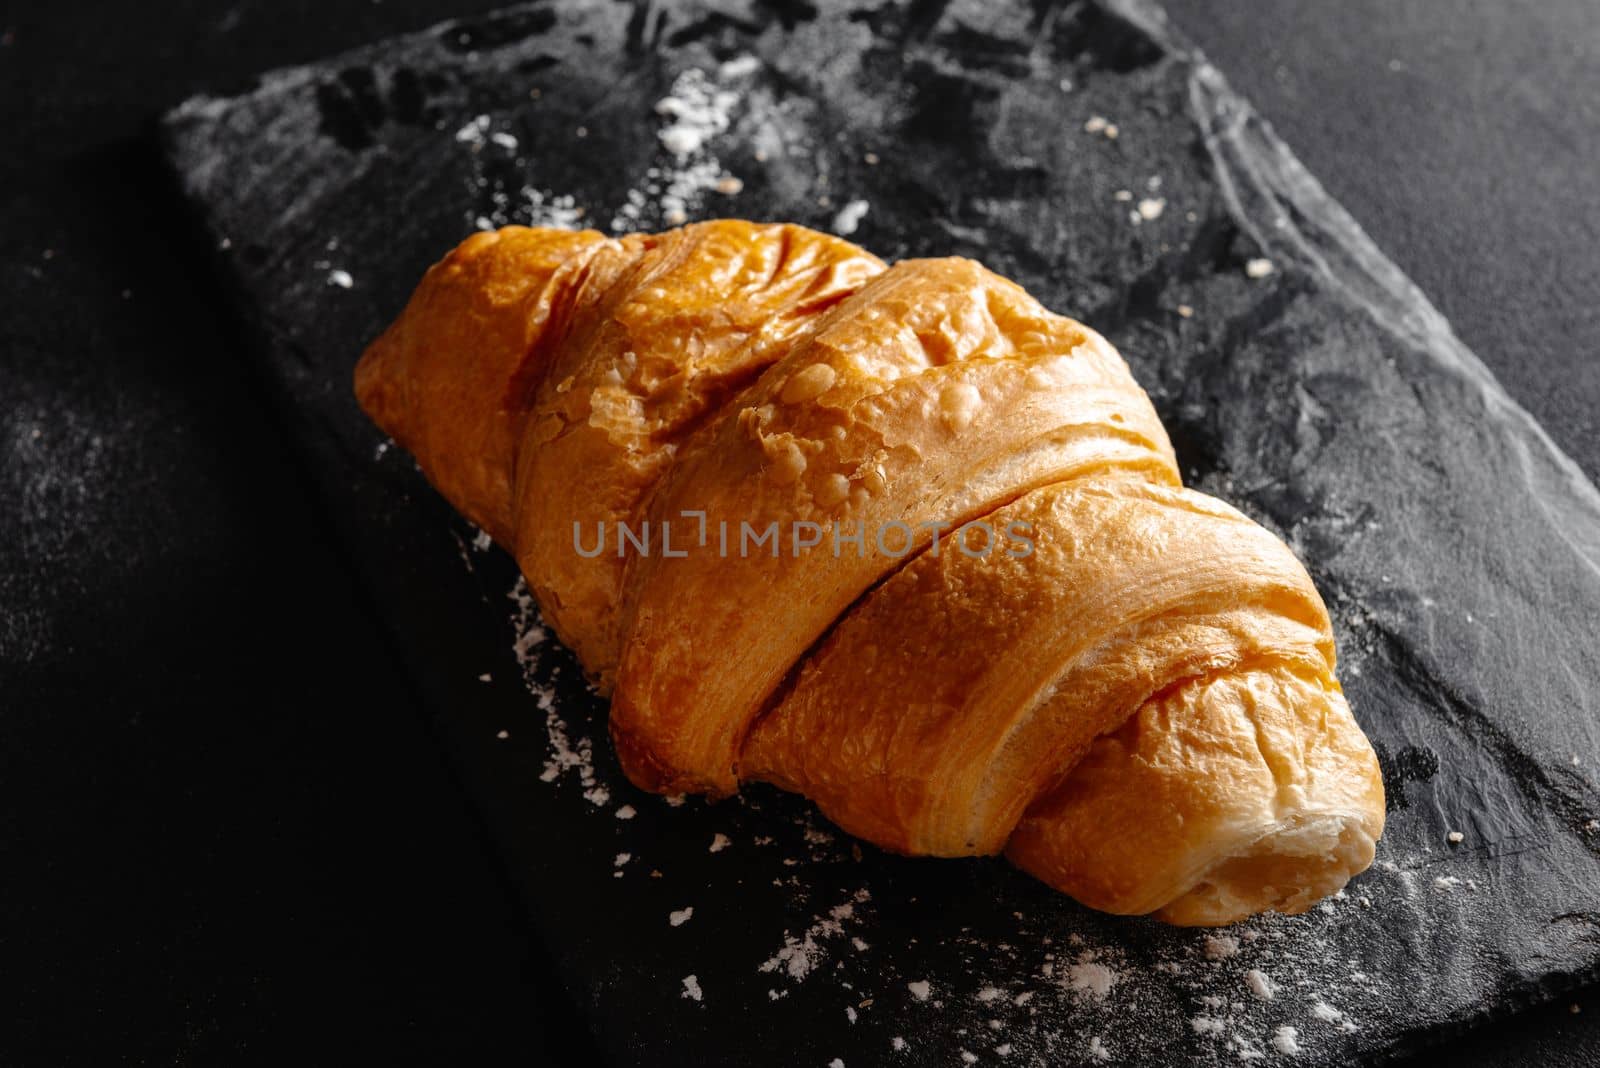 Large croissant on black background. Fresh and delicious French pastries, bakery concept, close-up image.